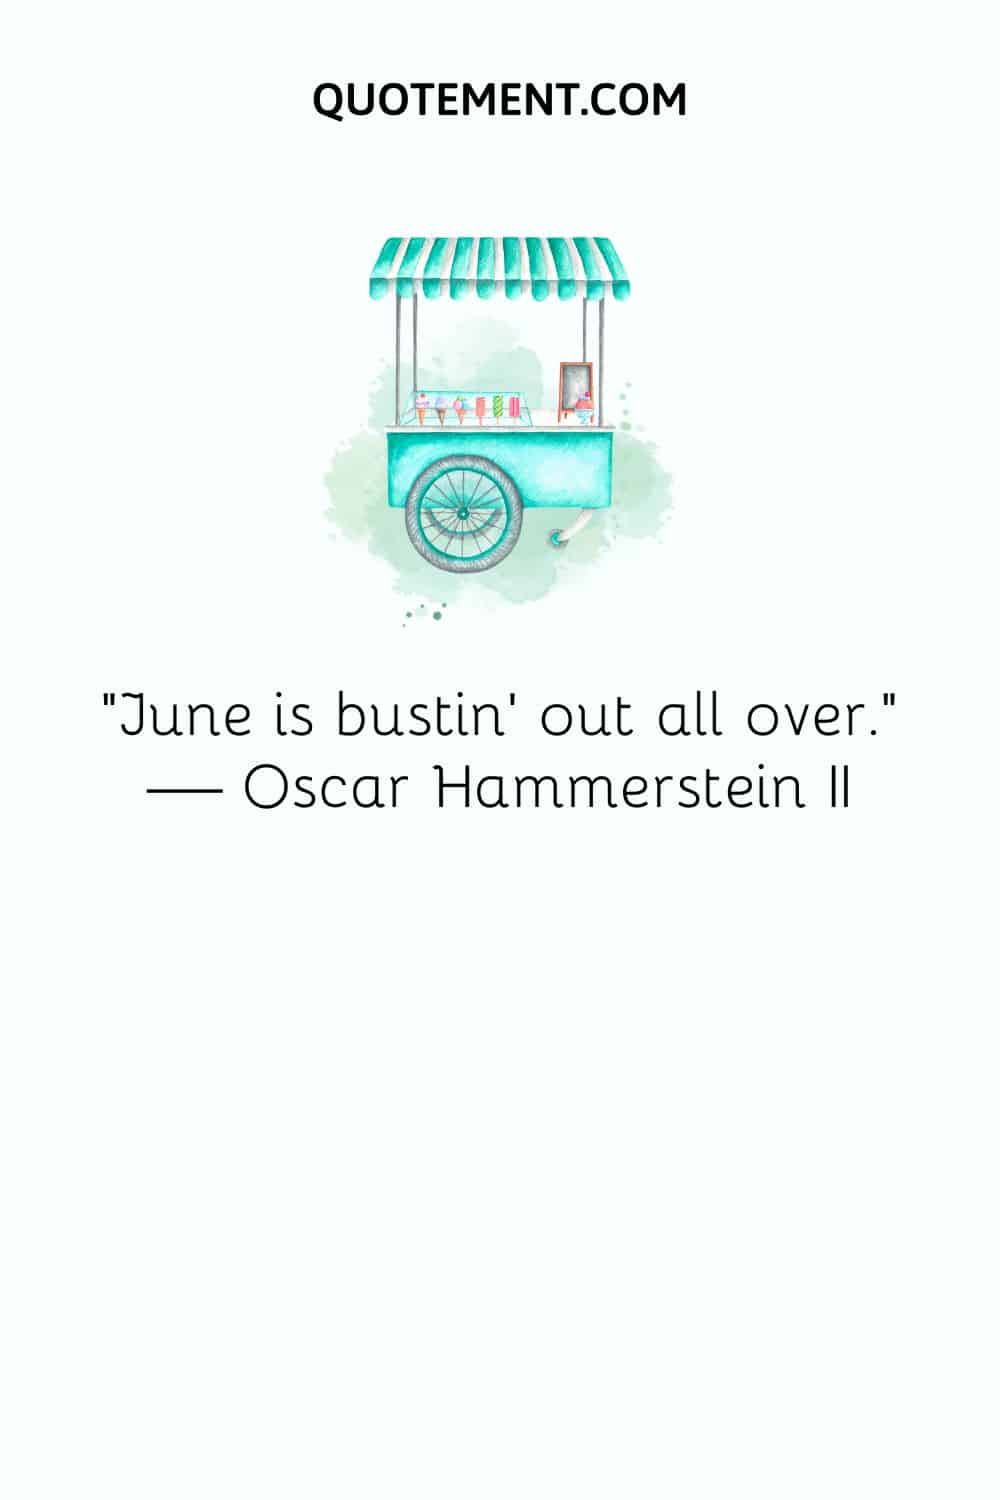 "June is bustin' out all over." - Oscar Hammerstein II